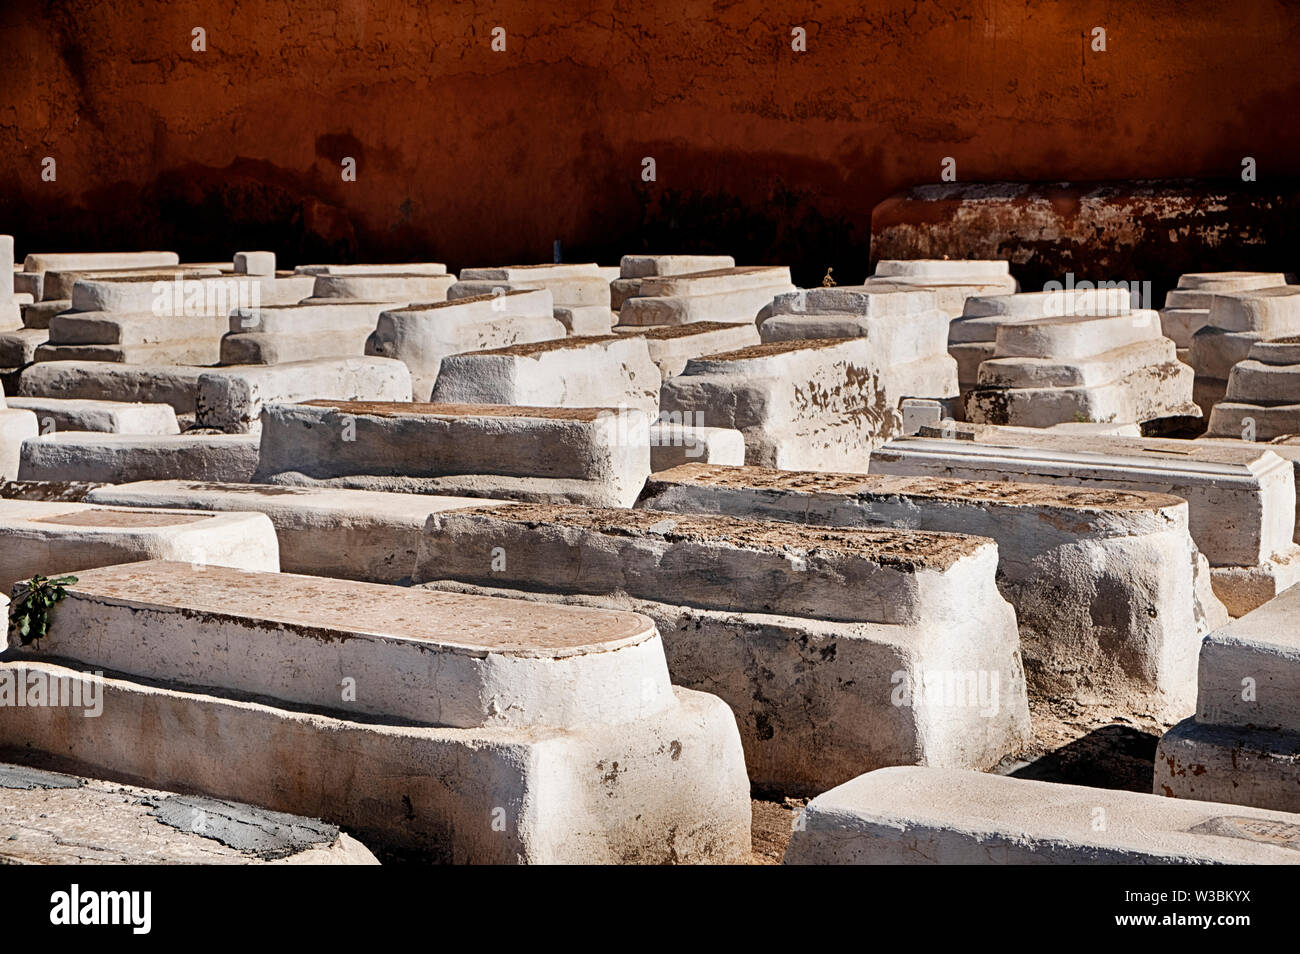 The traditional Jewish cemetery of Marrakesh, Morocco is filled with tombs painted with white paint. Stock Photo